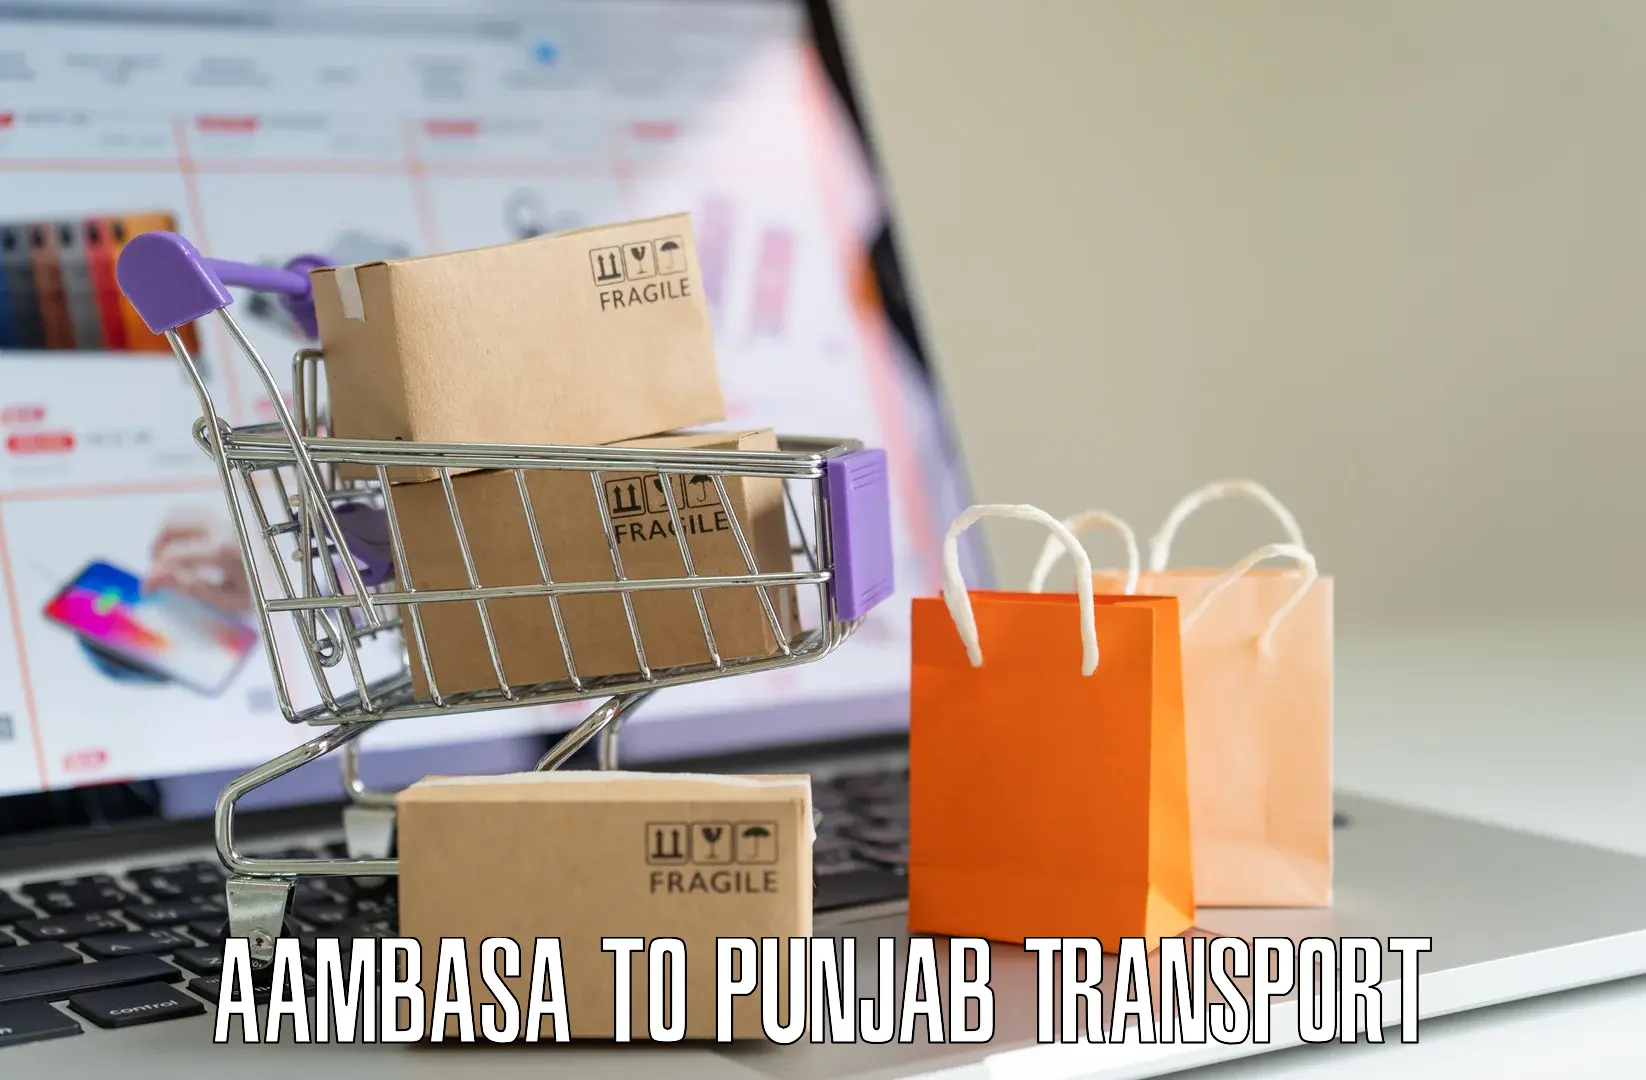 Express transport services in Aambasa to Bathinda